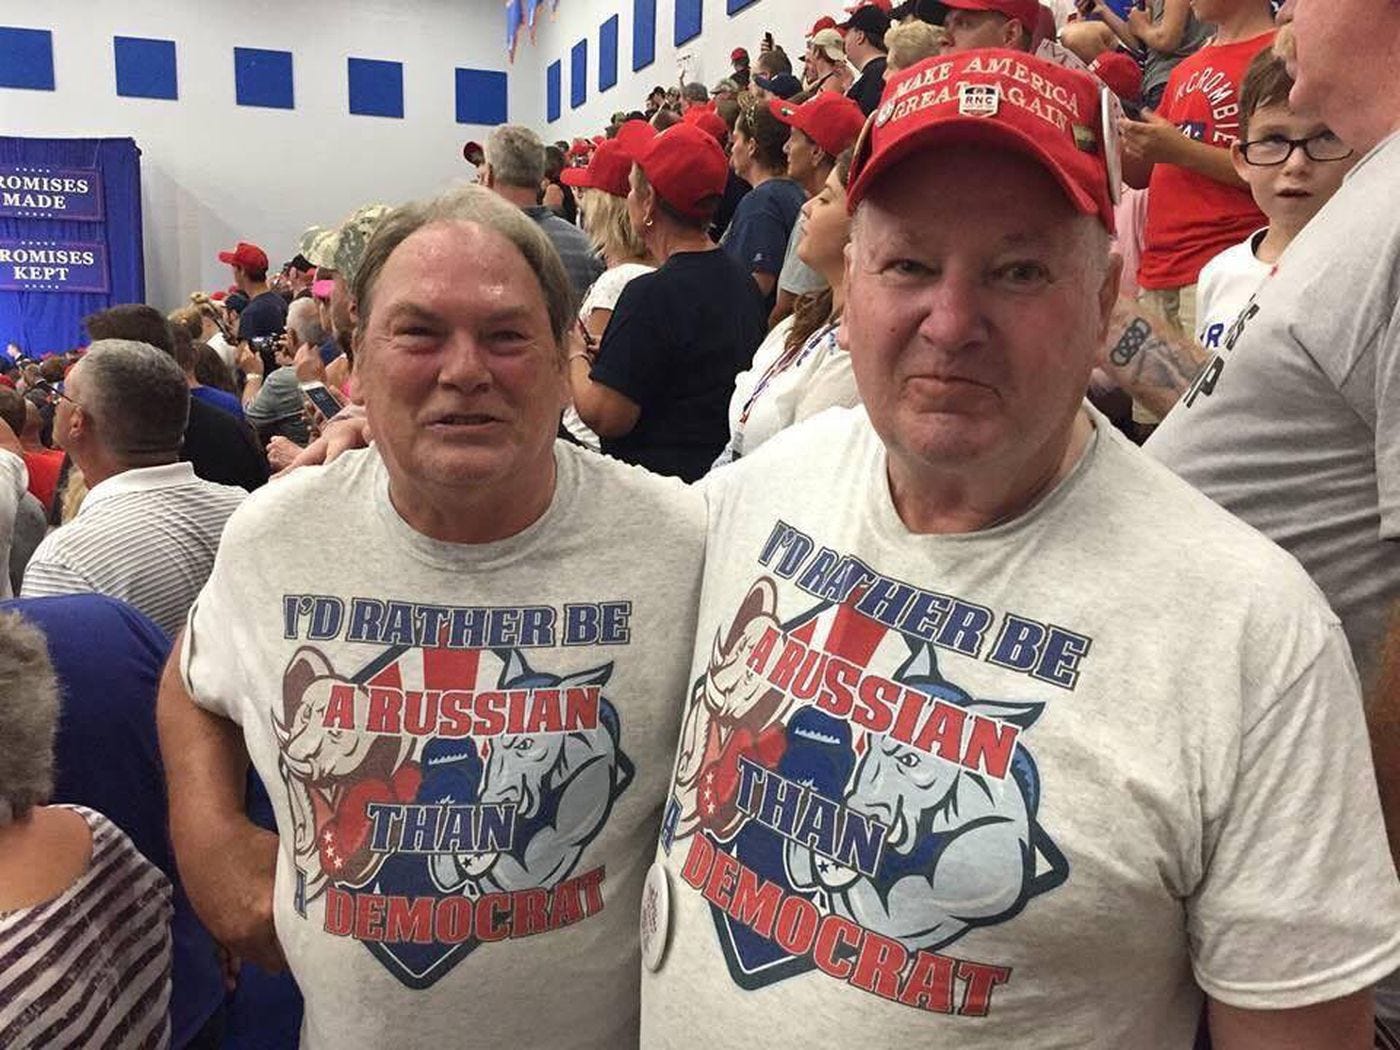 Trump Ohio rally: telling “I'd rather be a Russian than Democrat” photo -  Vox